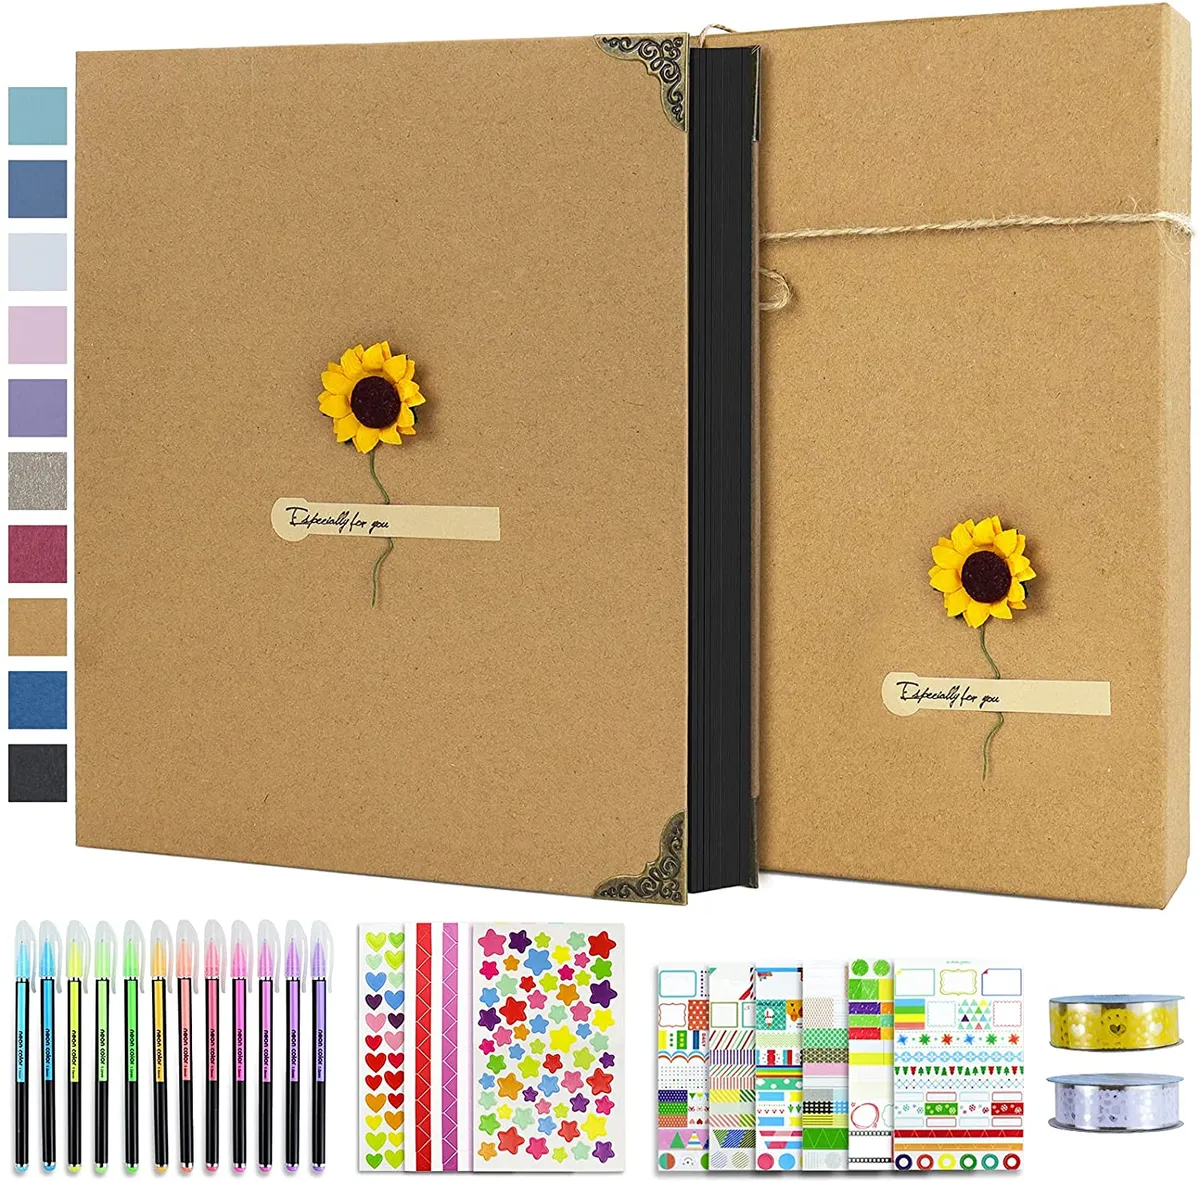 SICOHOME Scrapbooking Supplies,Scrapbook Kit for Gift,Scrapbooking and Card  Making